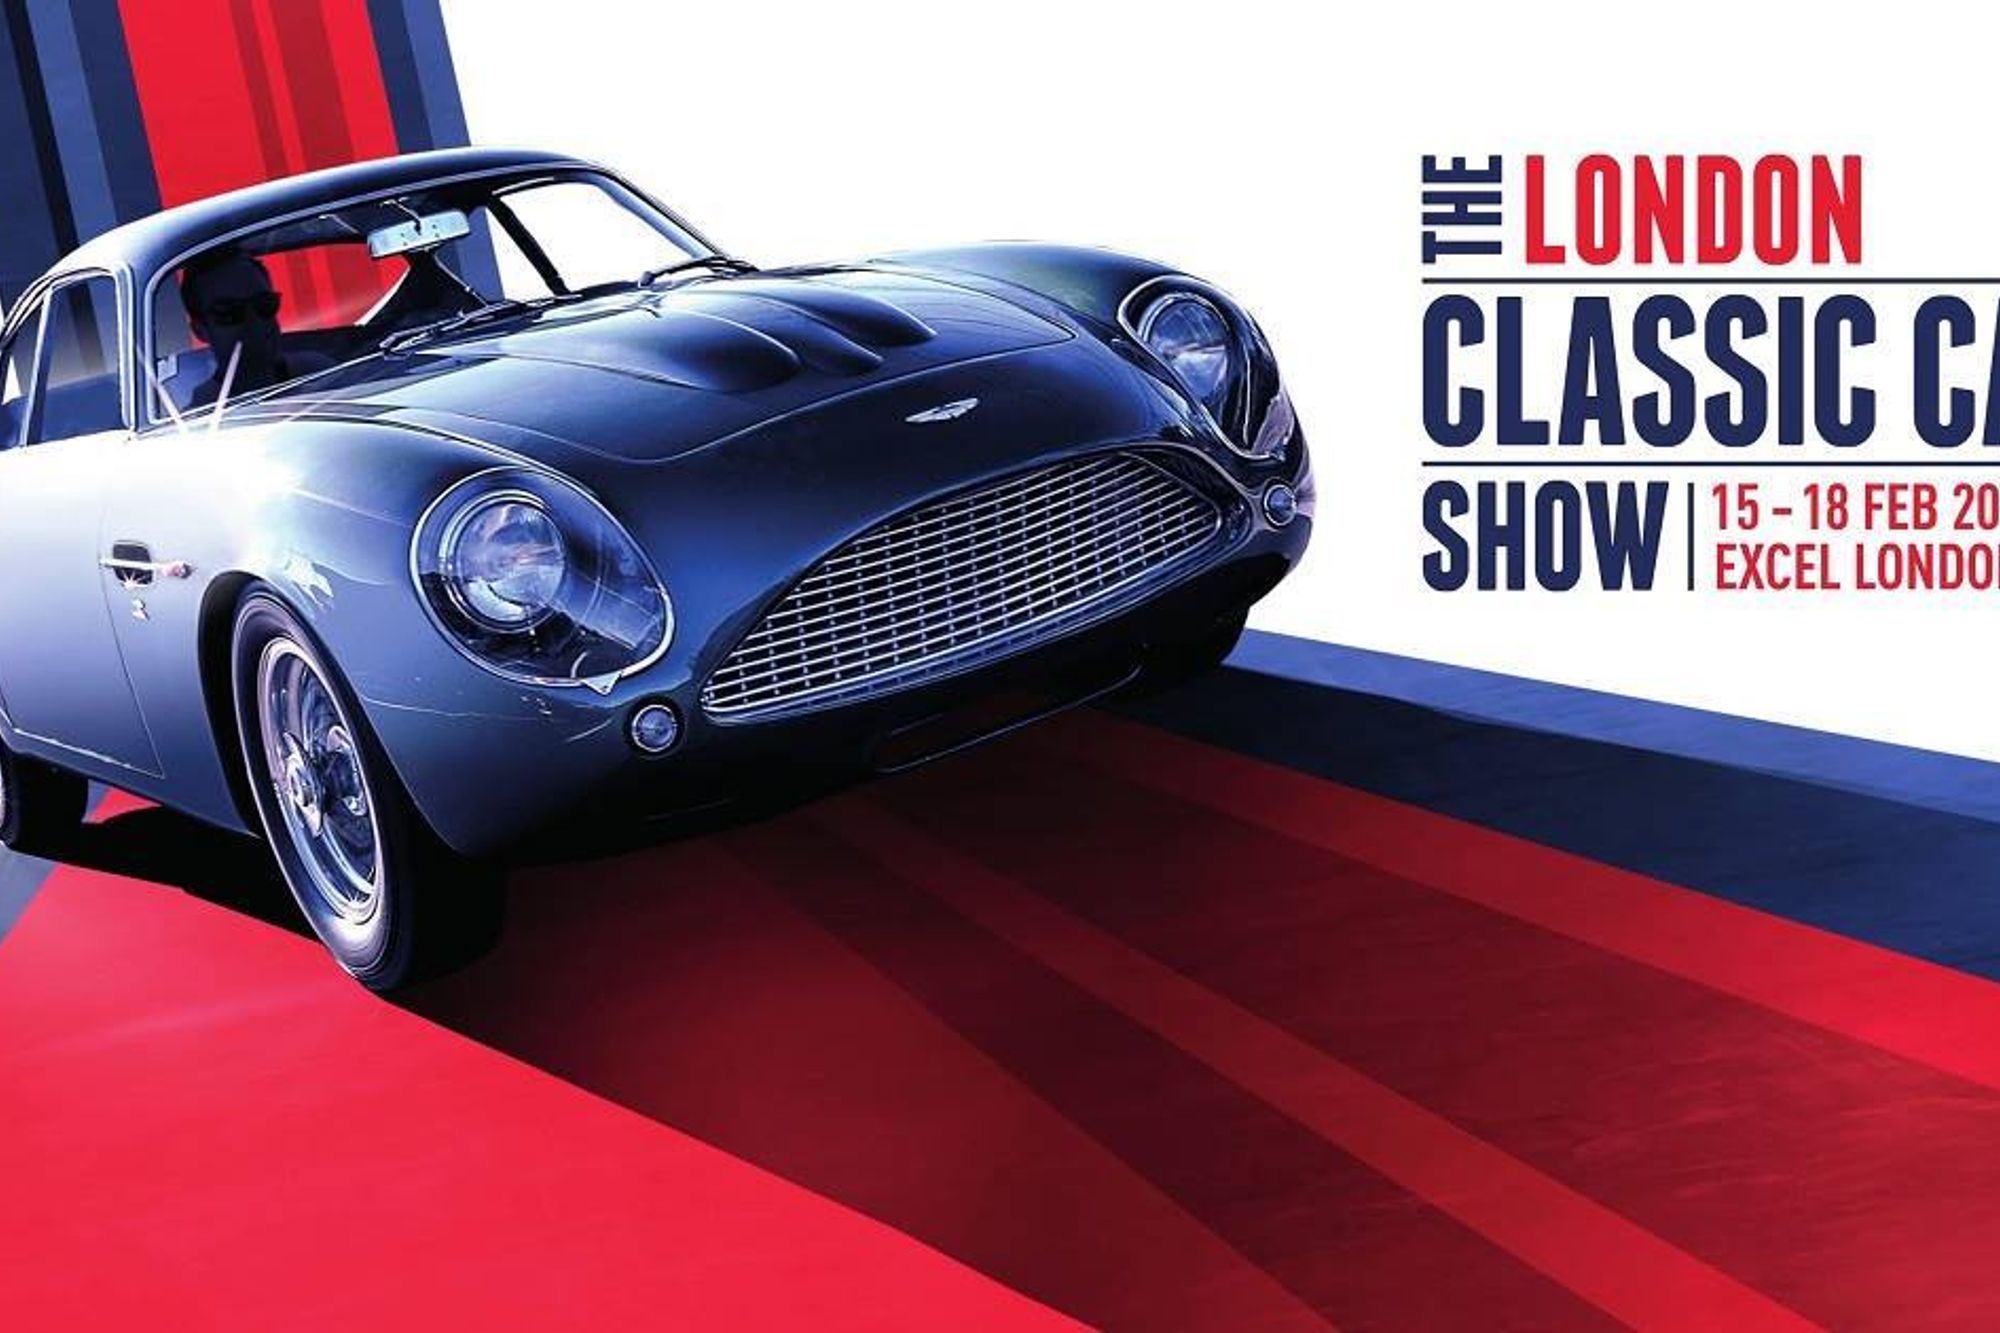 1 week until The London Classic Car Show!